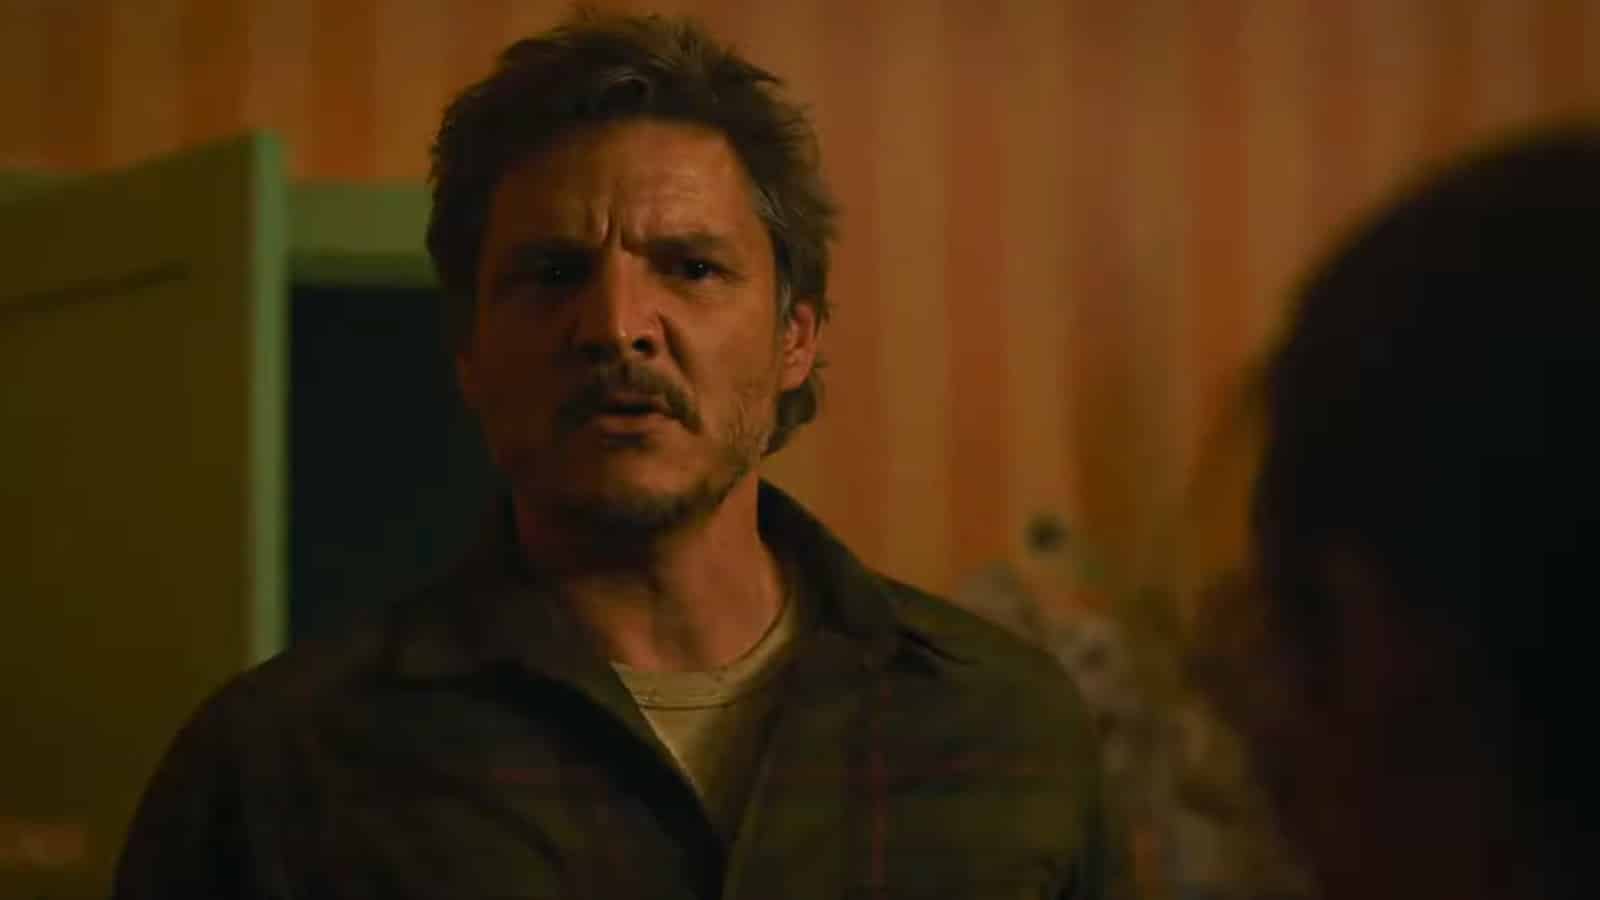 Pedro Pascal as Joel in The Last of Us HBO Max series